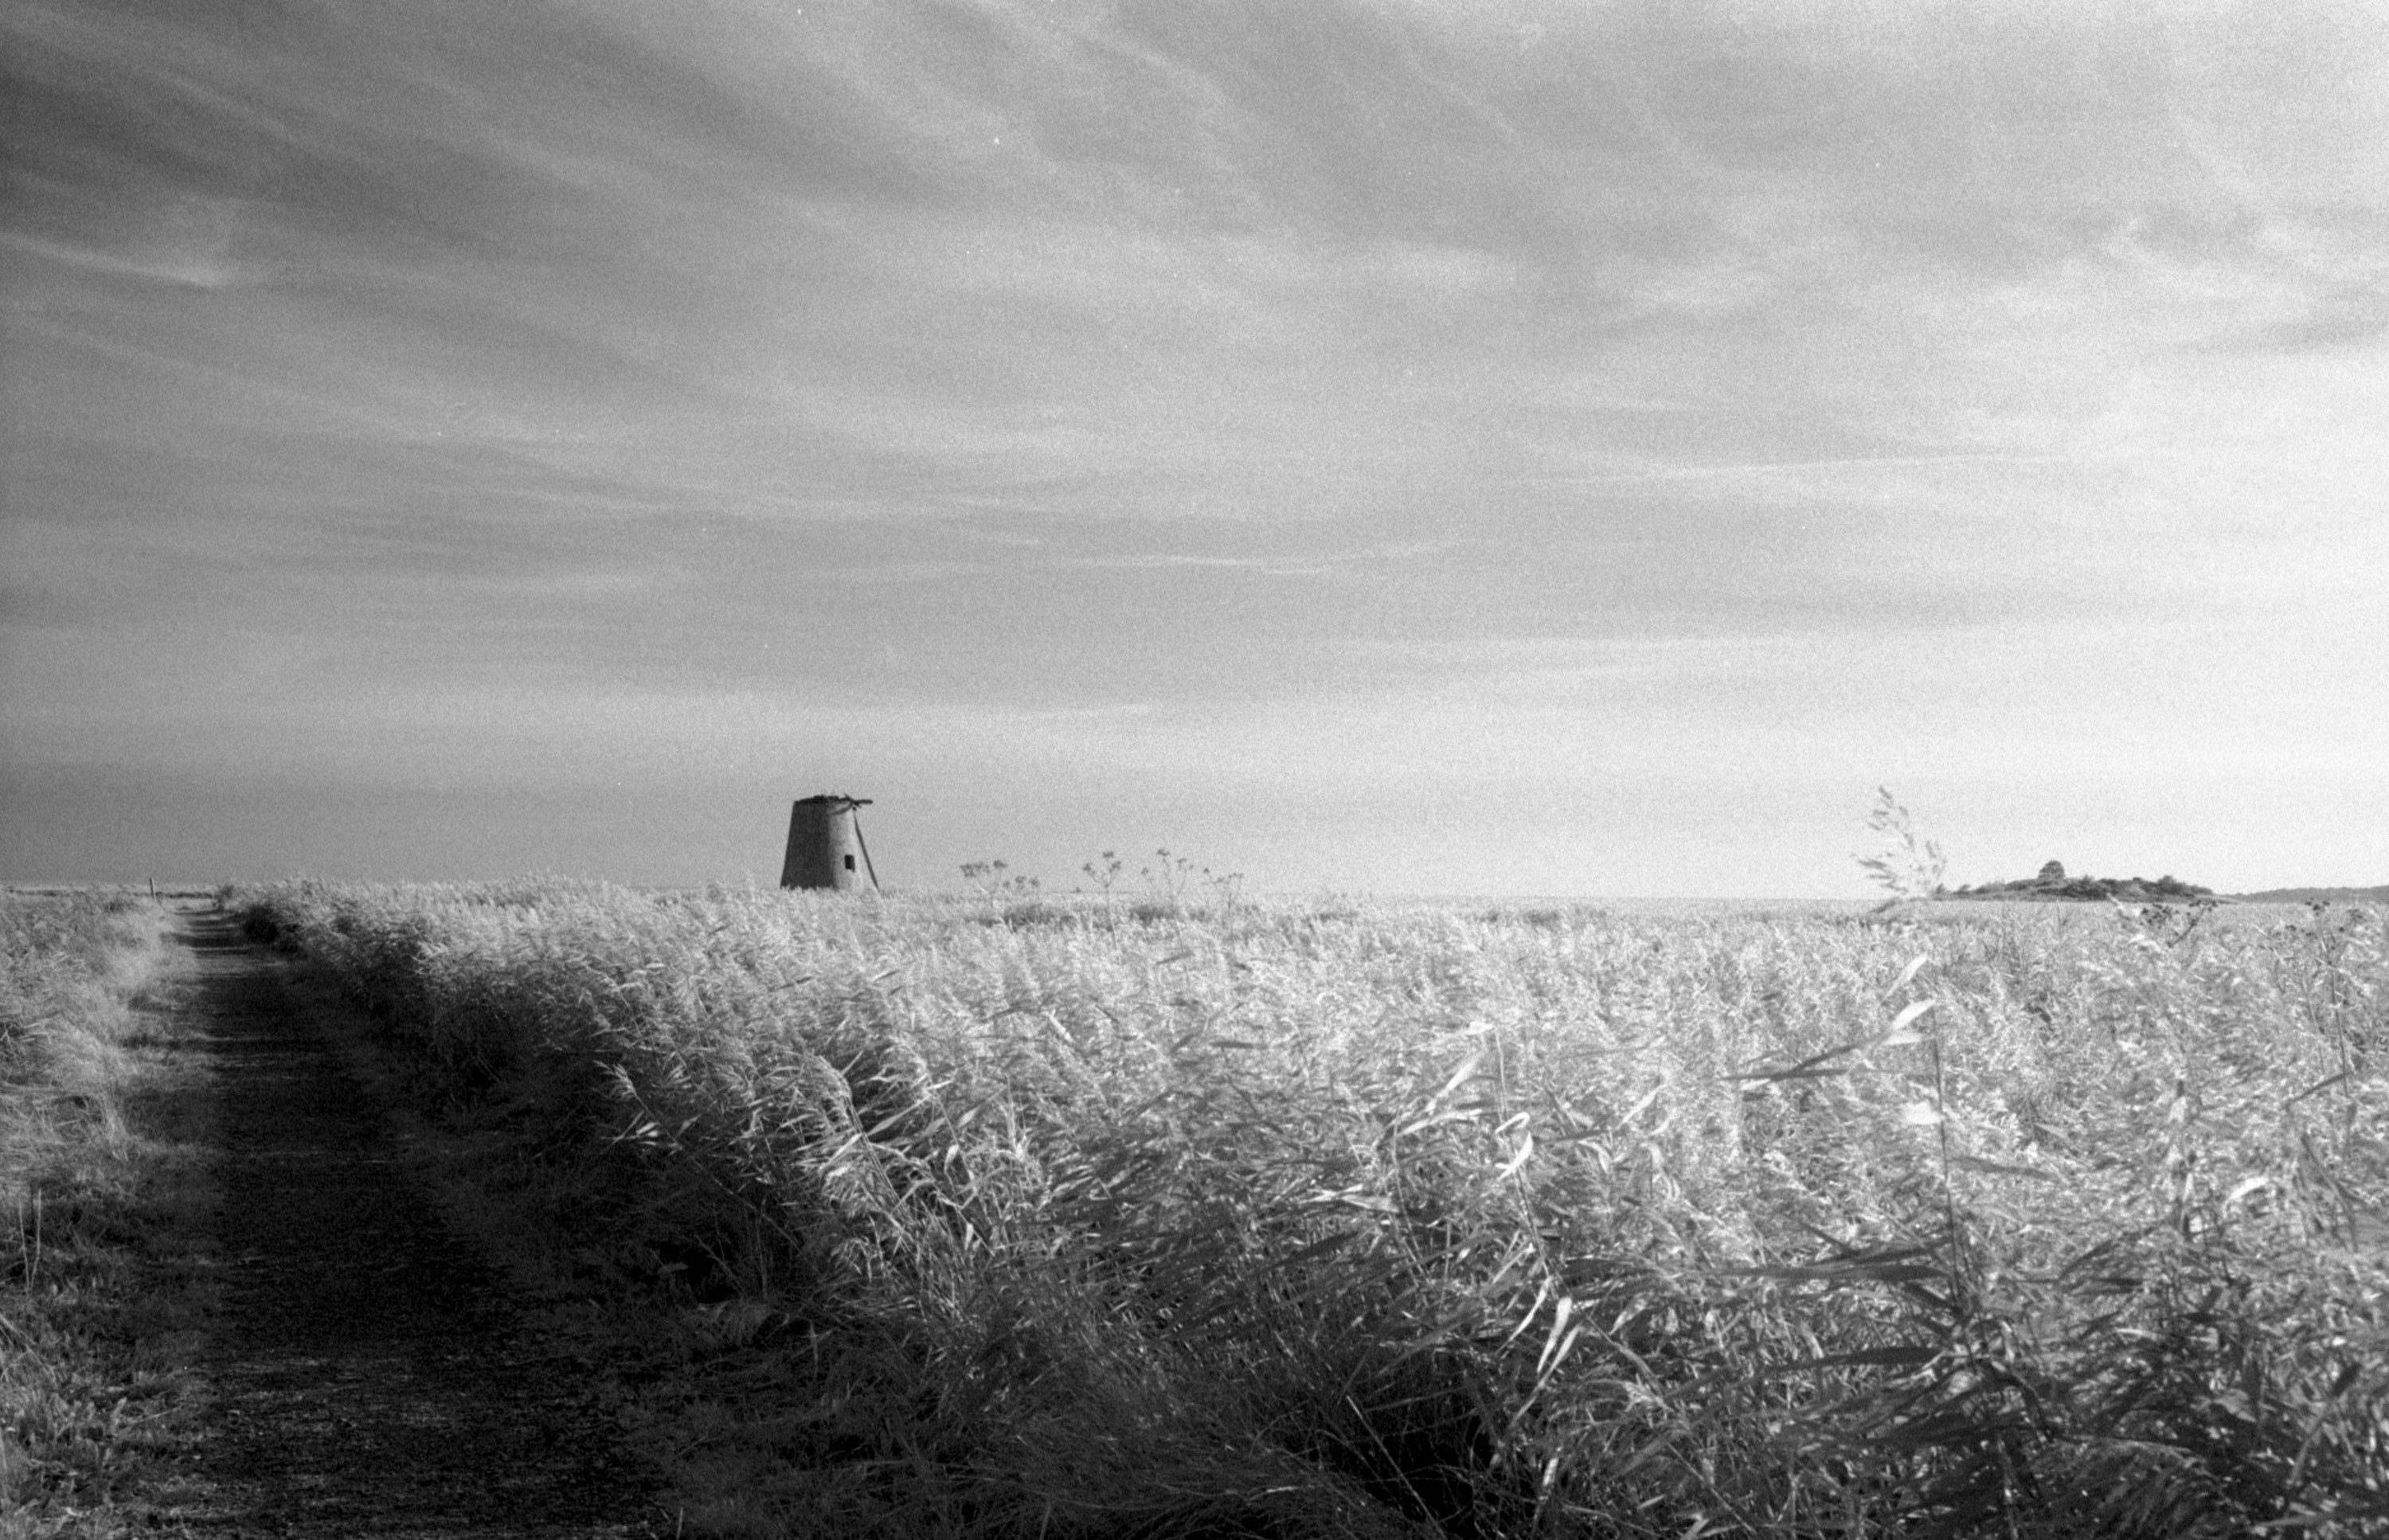 Black adn white images shot on ILFORD SFX200 film by Jason Avery